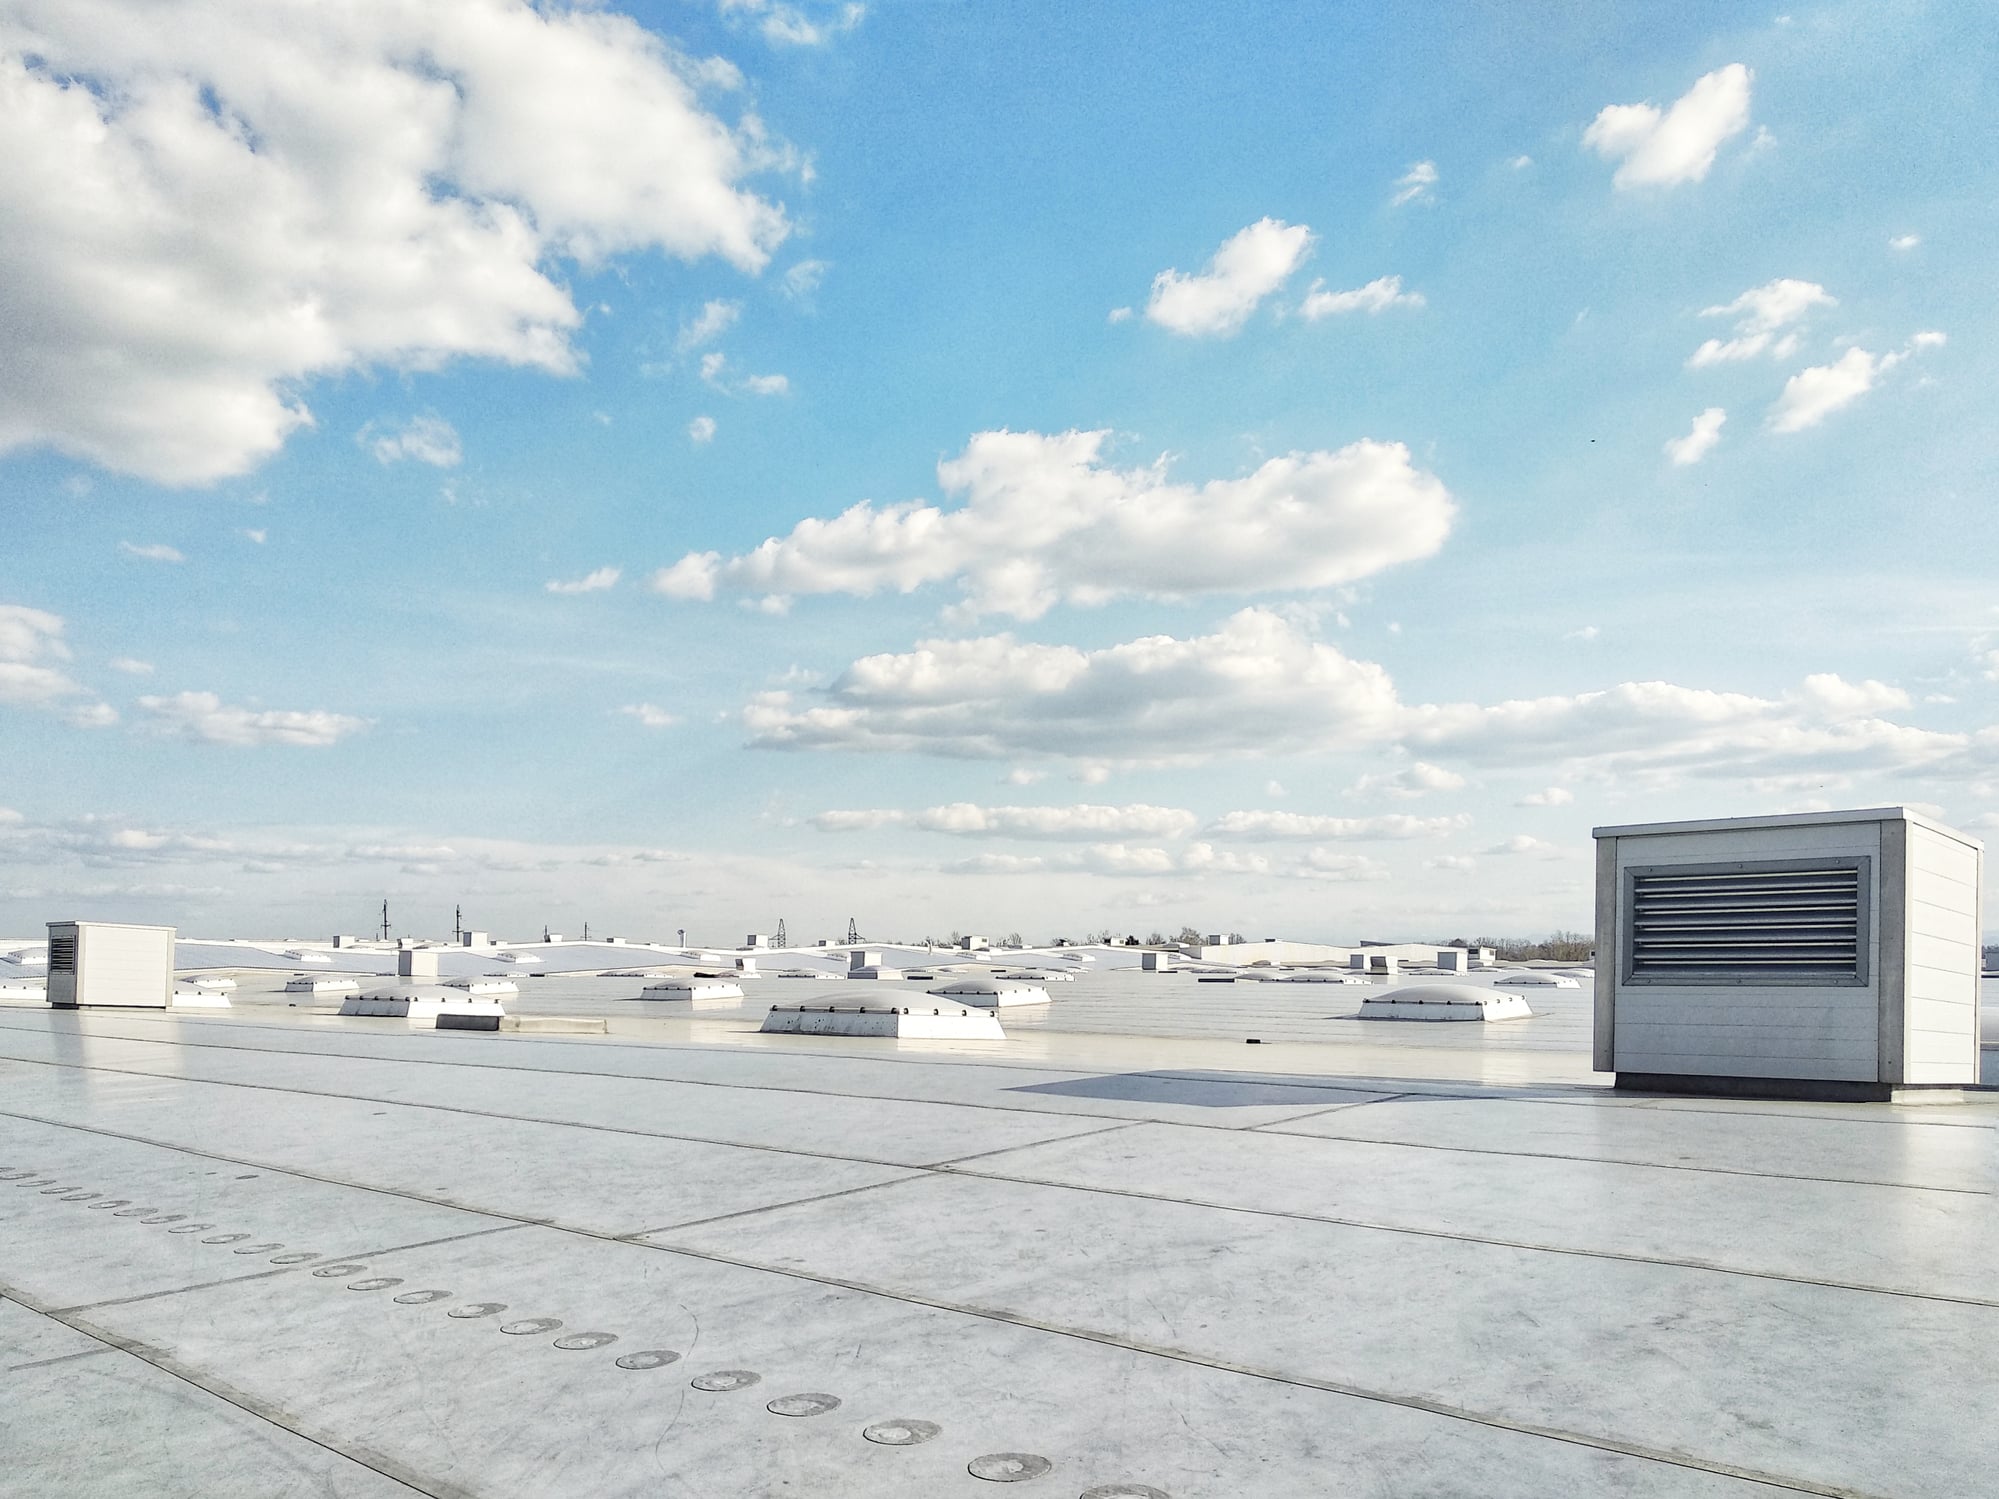 Ventilation systems on the building roof, technology, HVAC